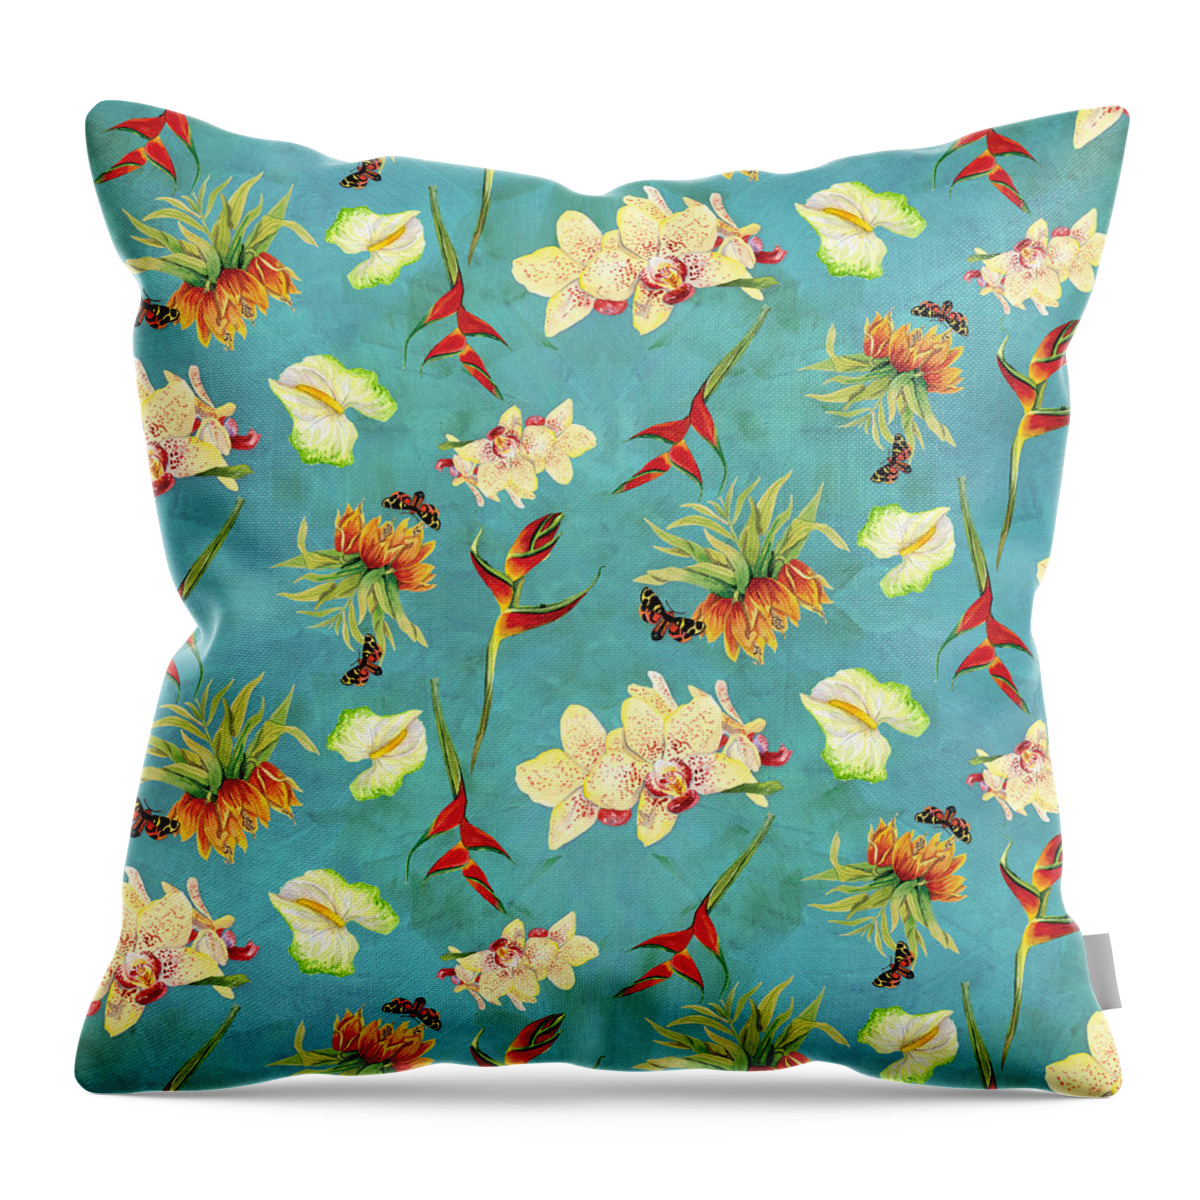 Orchid Throw Pillow featuring the painting Tropical Island Floral Half Drop Pattern by Audrey Jeanne Roberts